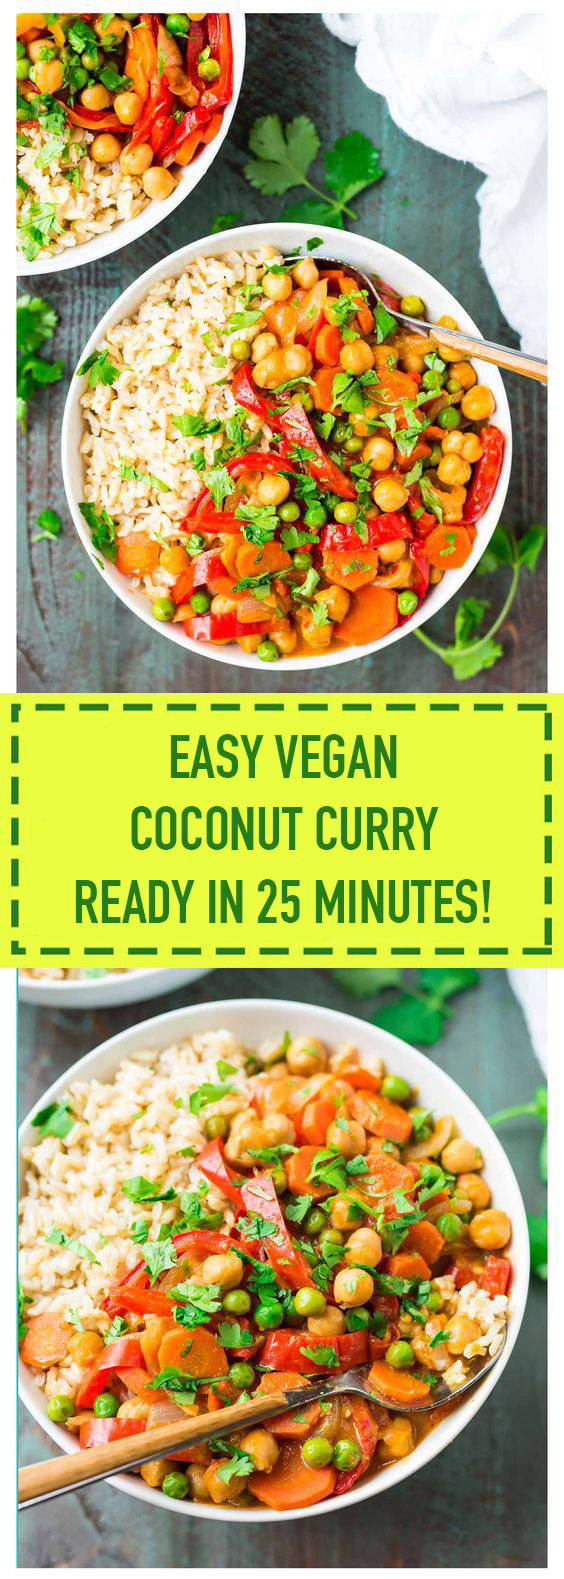 Easy Vegan Coconut Curry Ready in 25 Minutes!